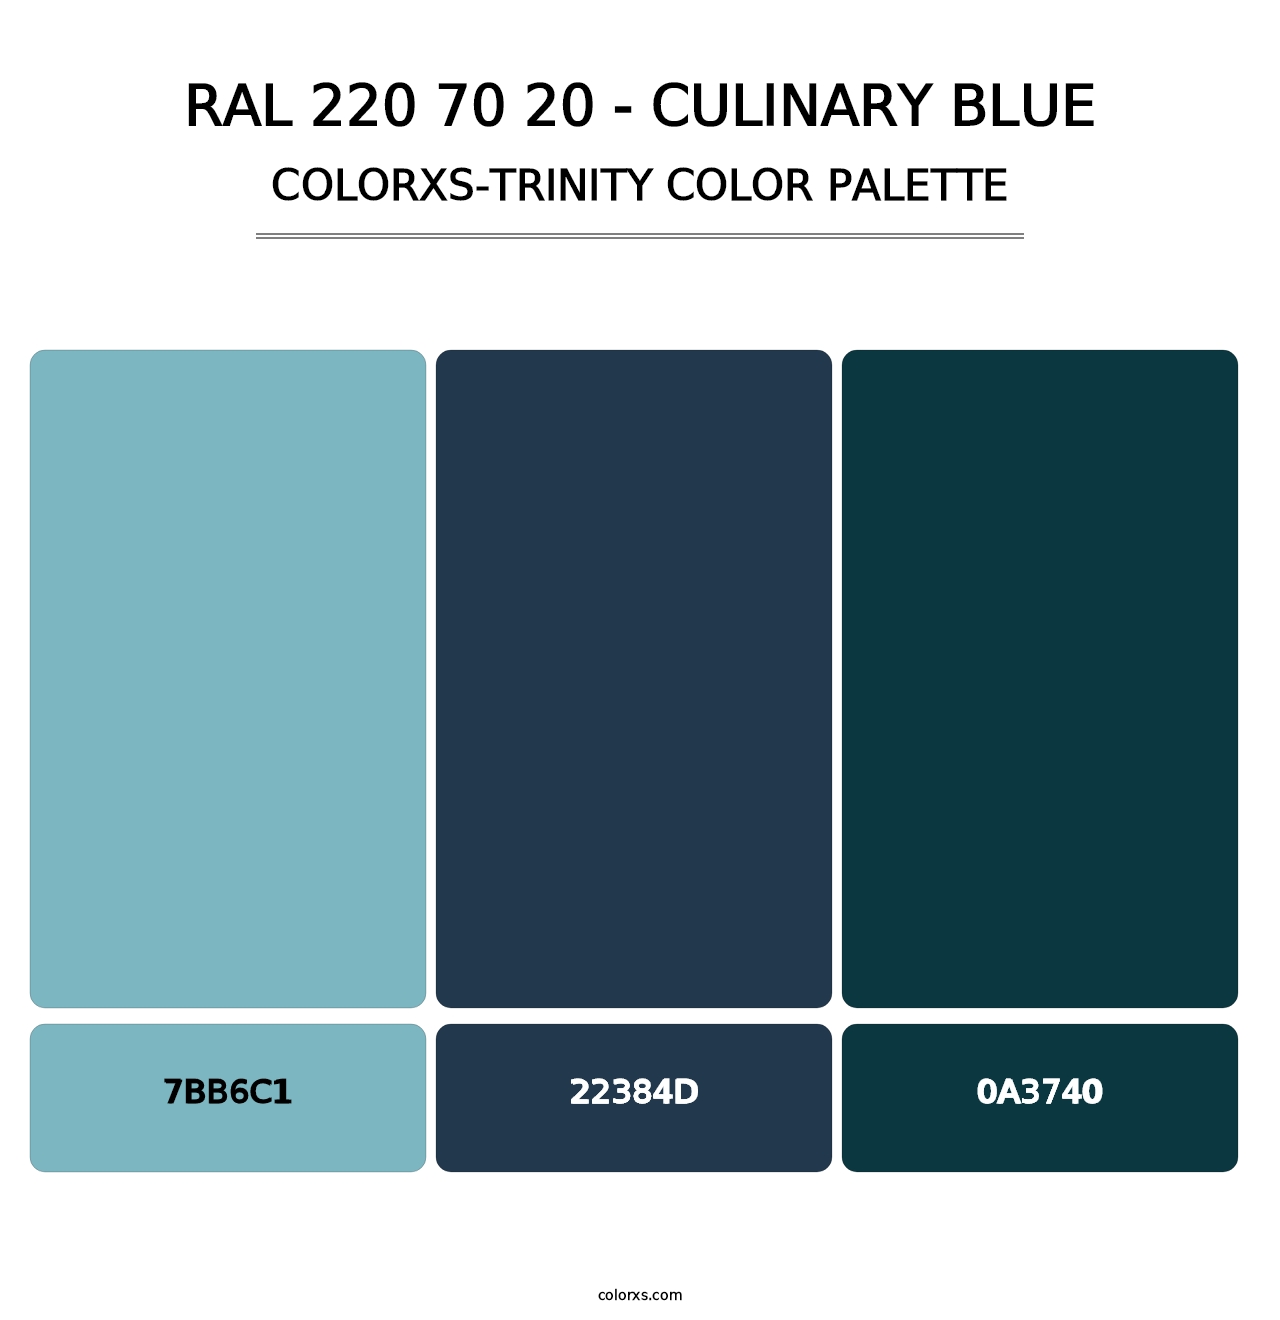 RAL 220 70 20 - Culinary Blue - Colorxs Trinity Palette